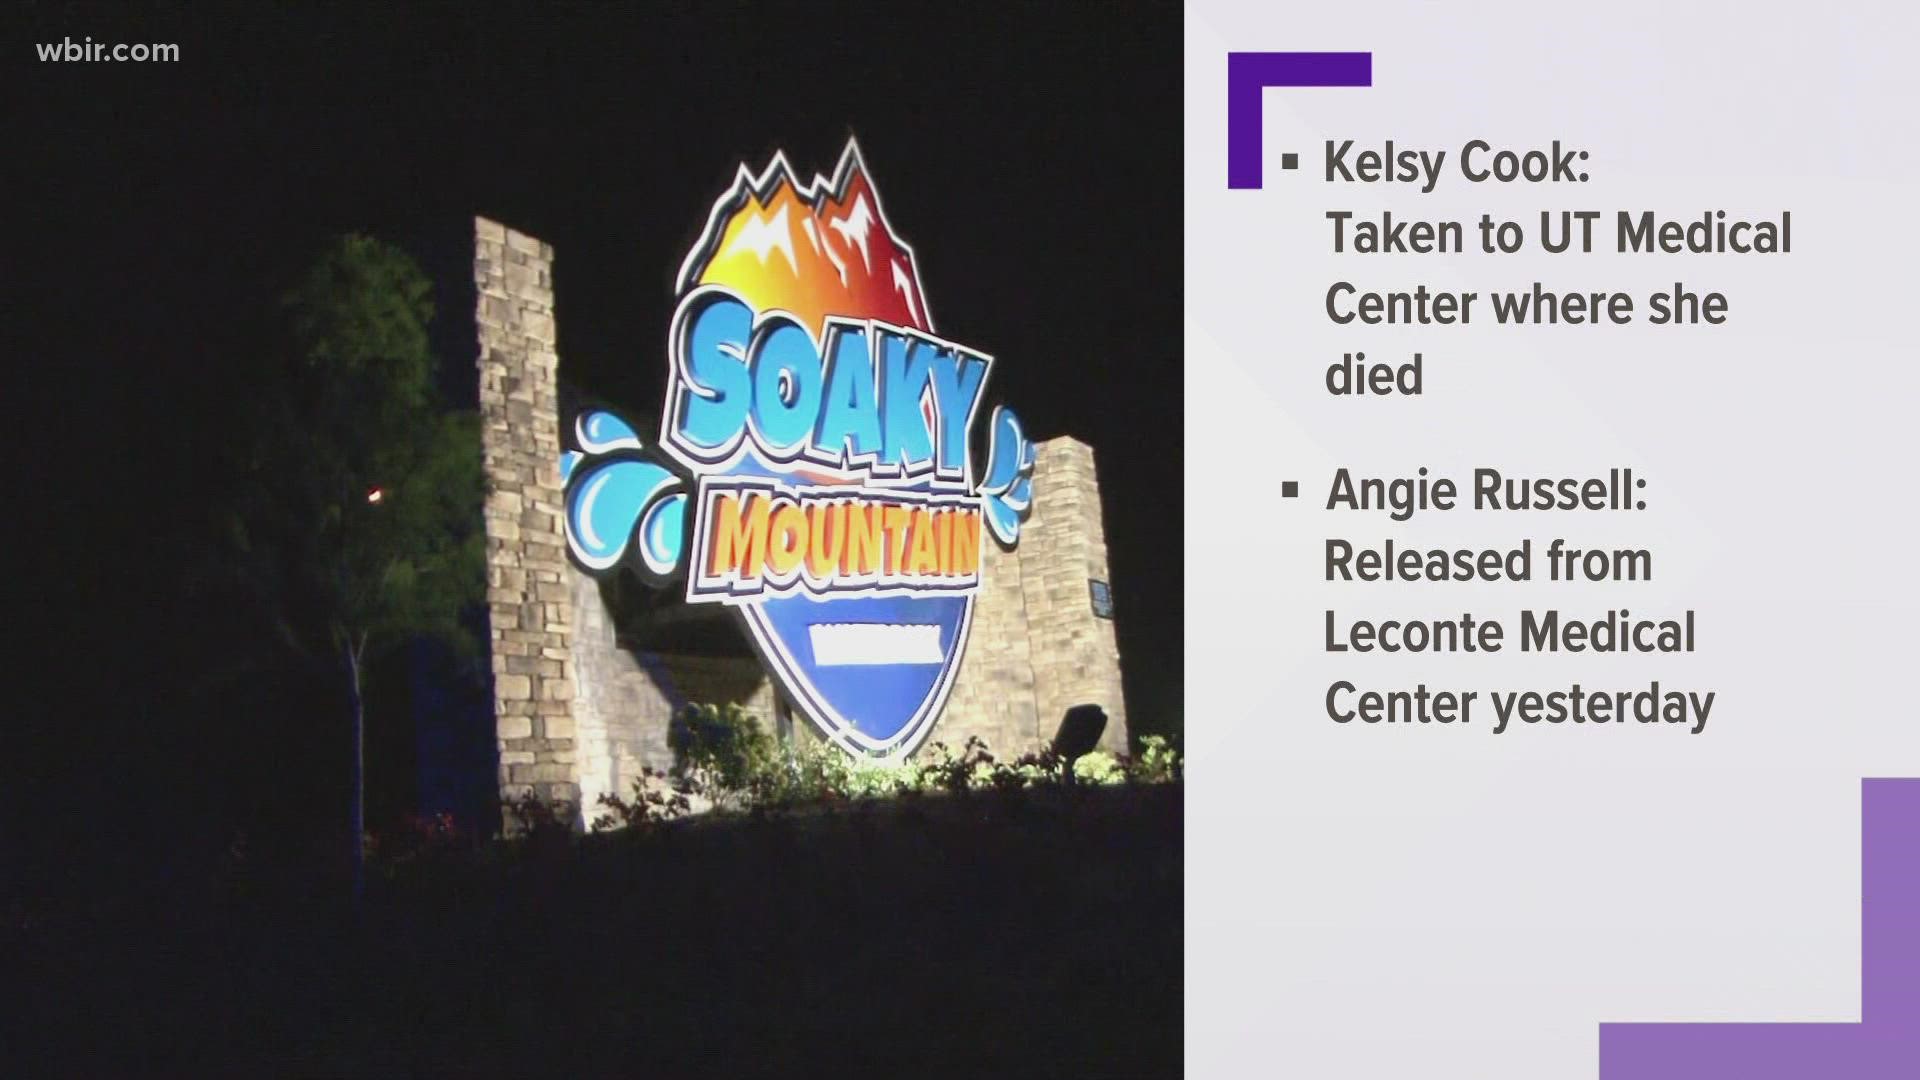 Police records say that a woman fired shots in the parking lot of Soaky Mountain, killing one person and hurting another.